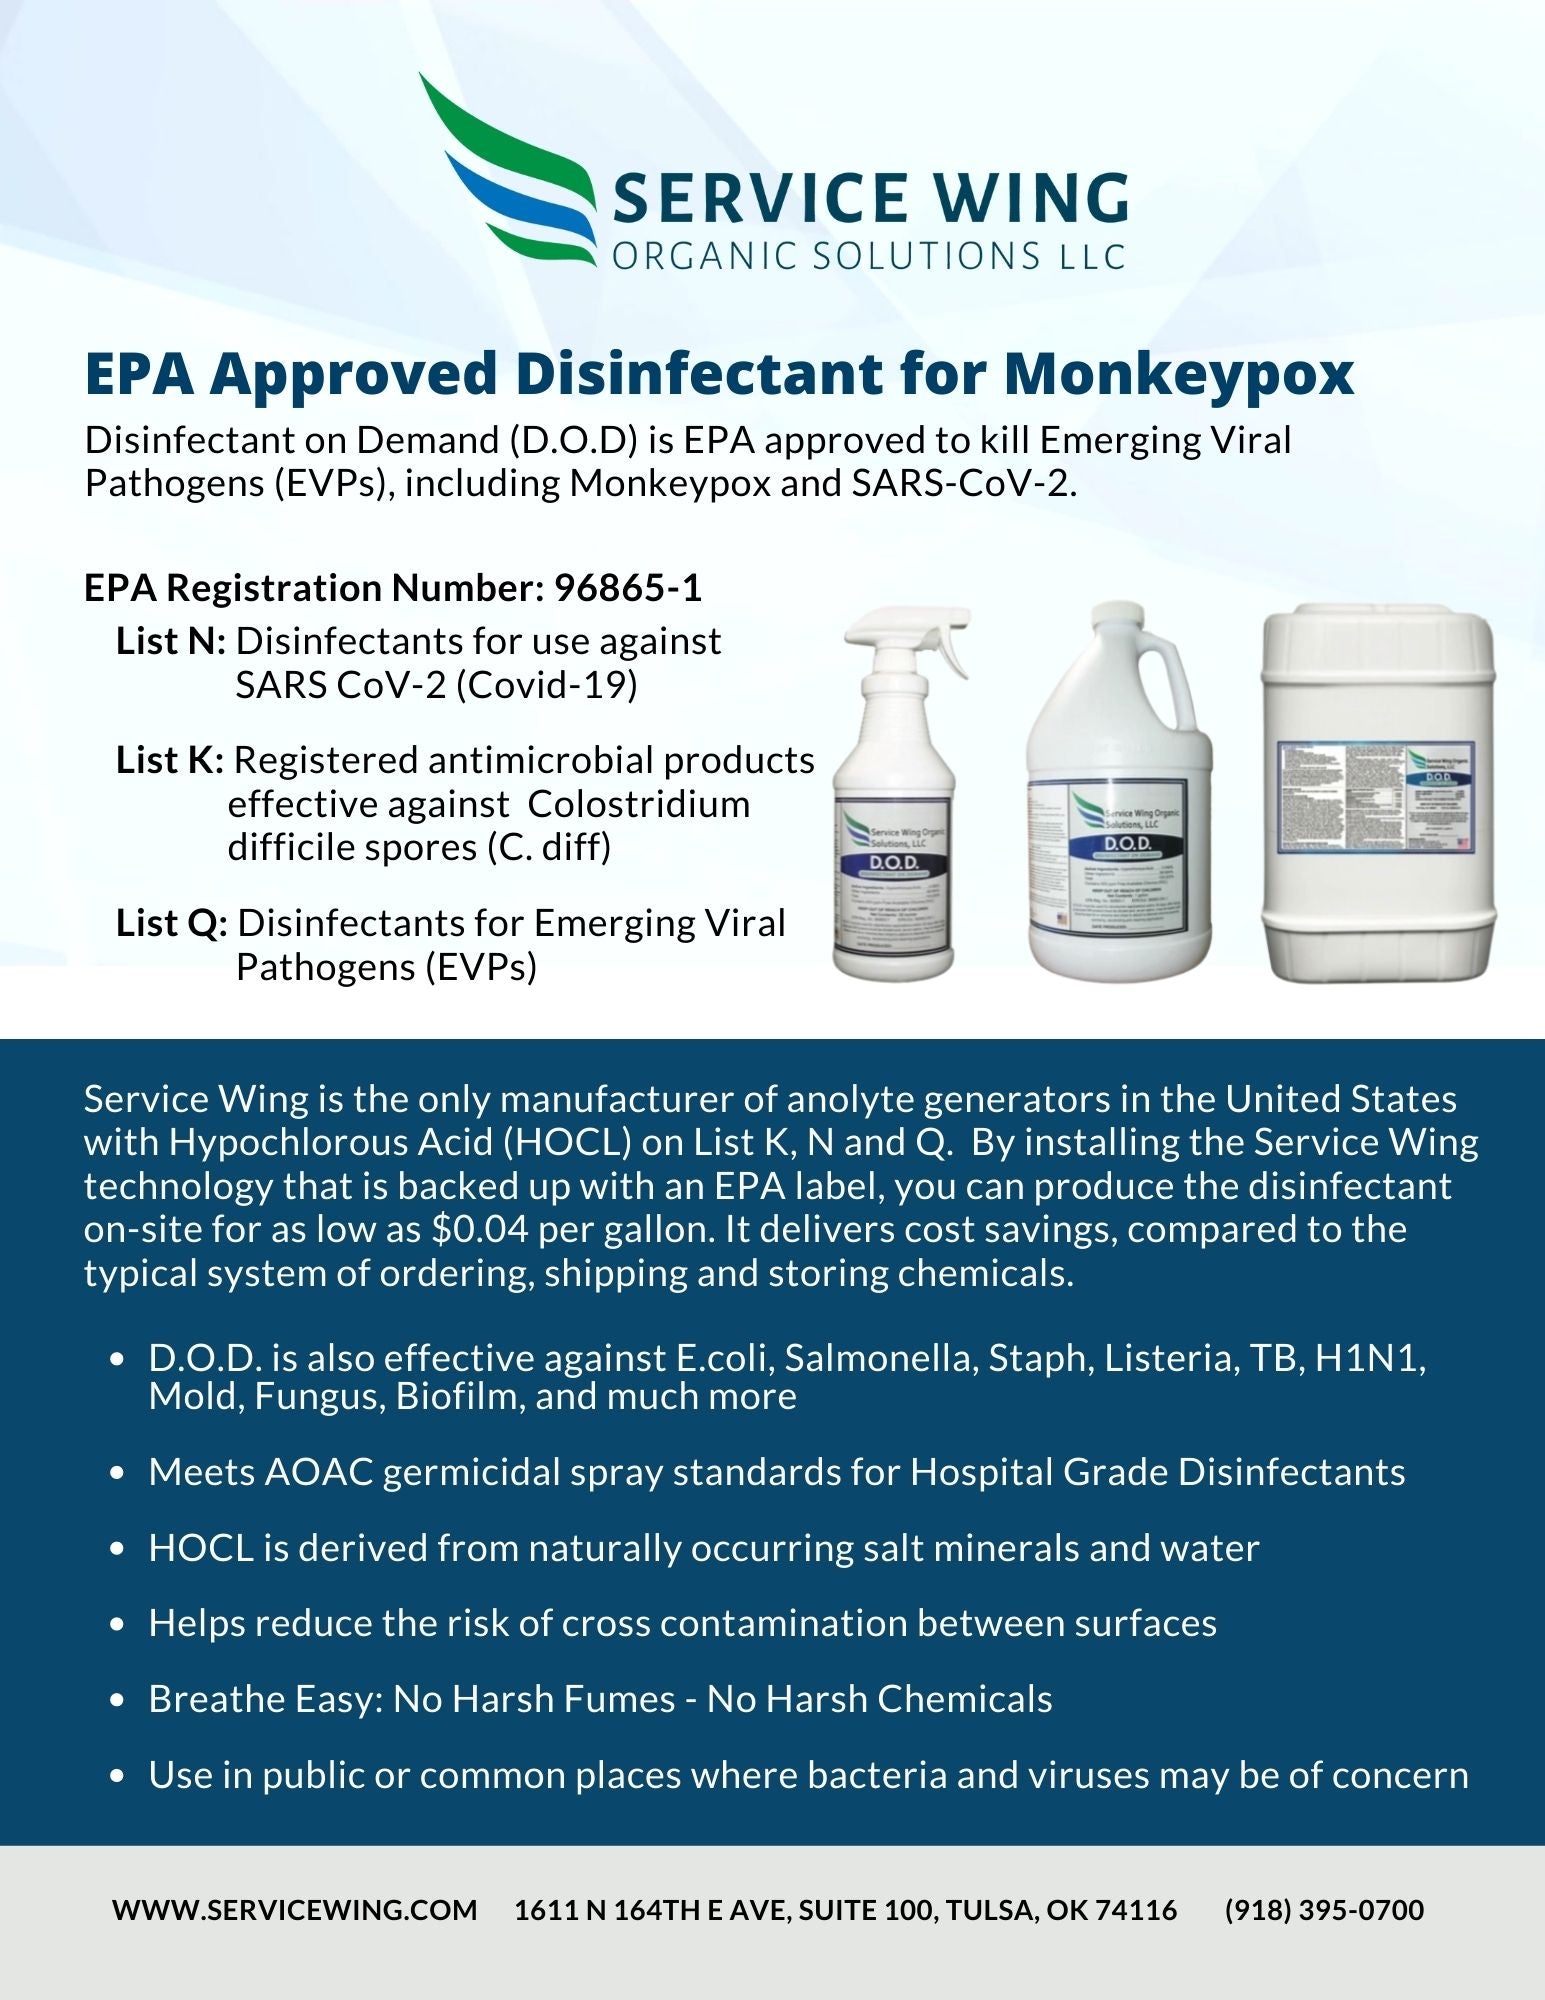 D.O.D. is EPA approved to eliminate Monkeypox!